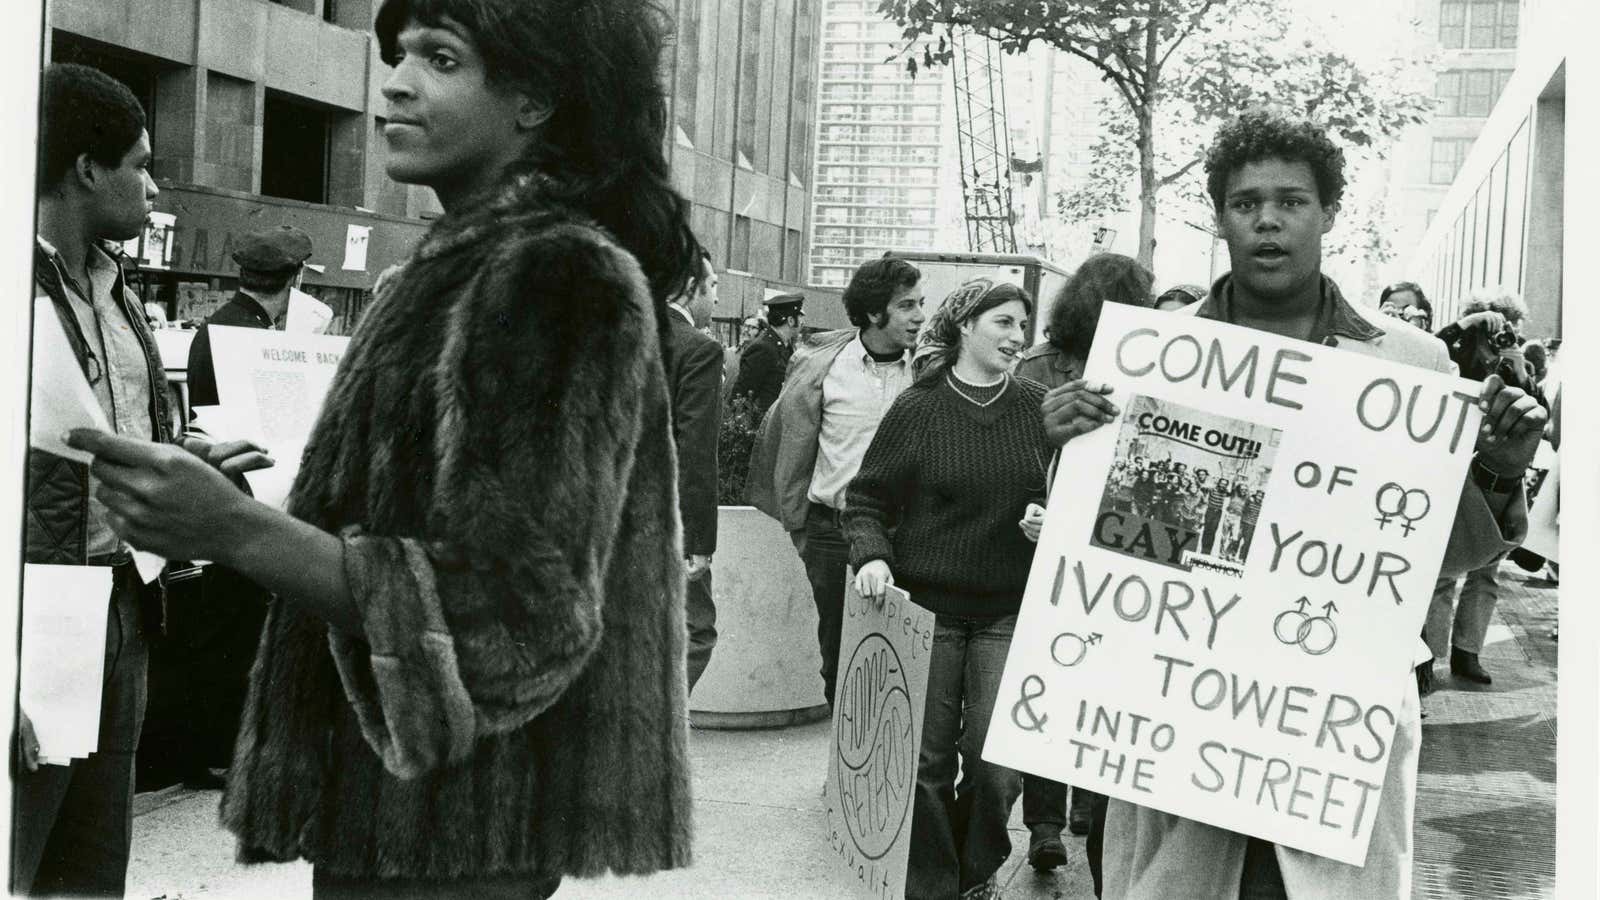 A 1970 photo of Marsha P. Johnson handing out flyers in support of Gay Students at NYU.